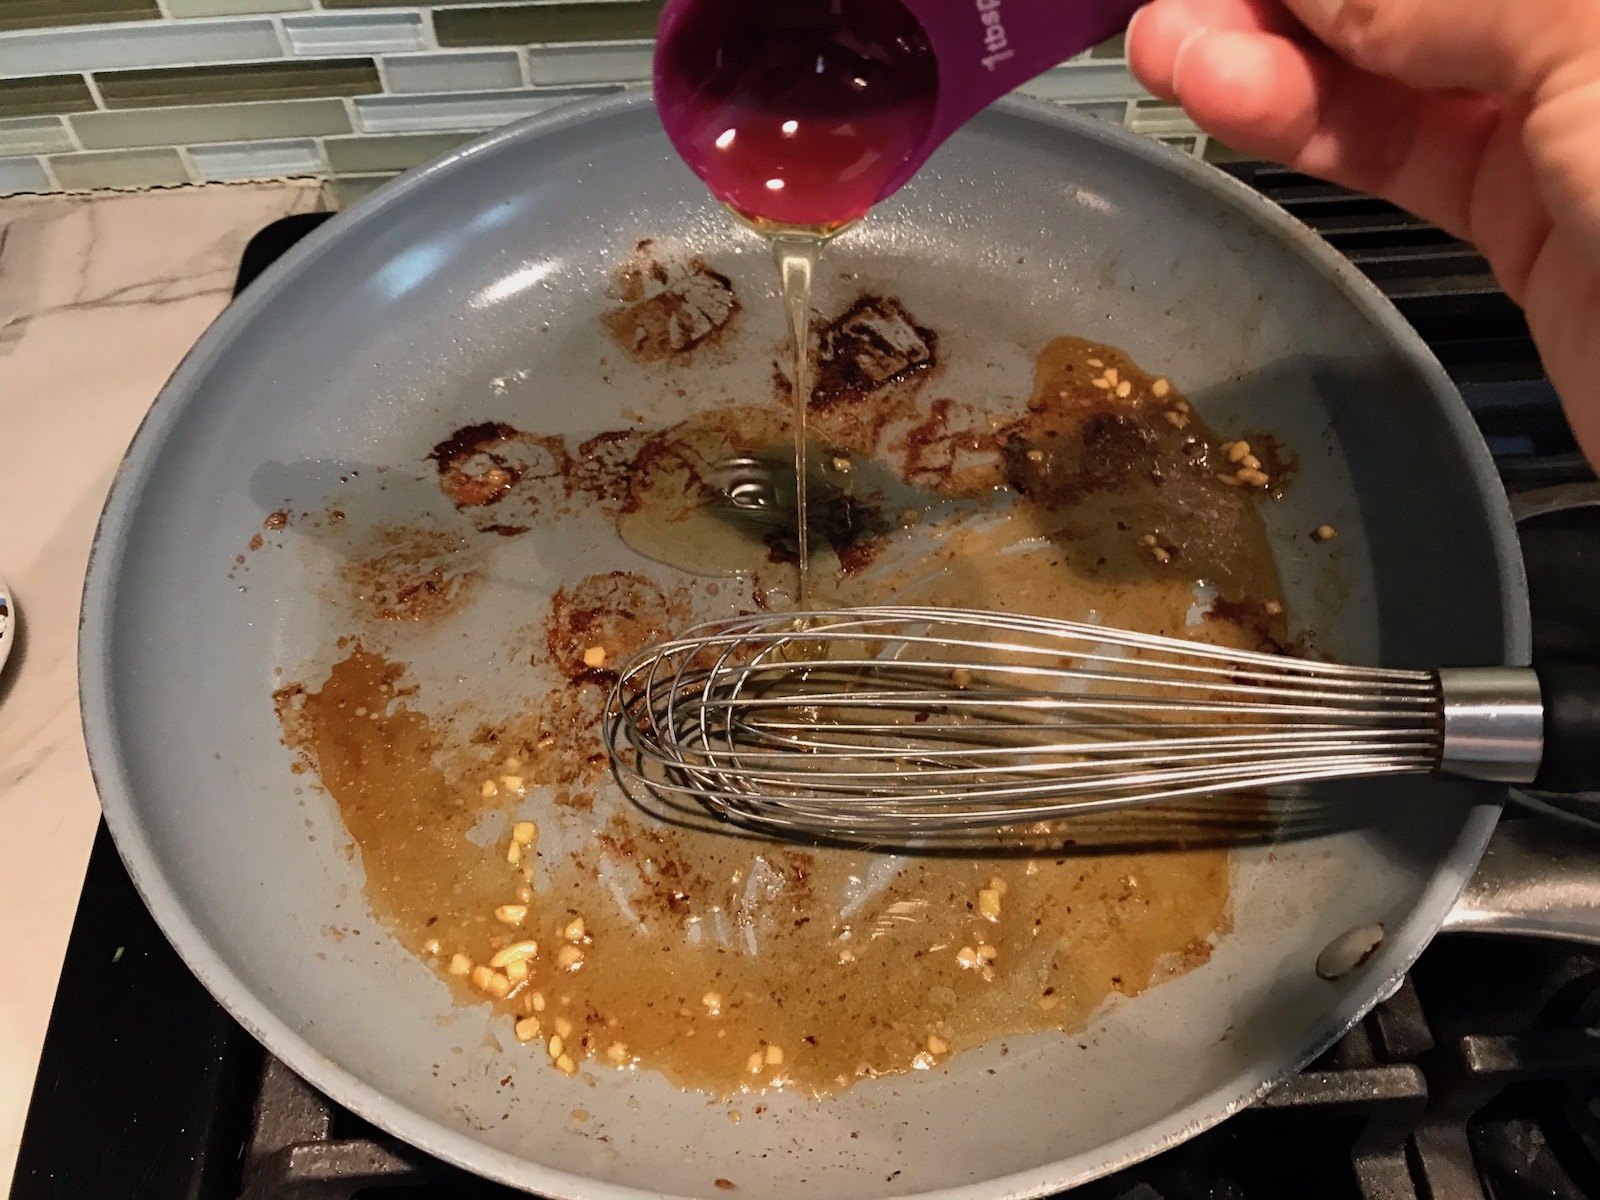 Hand pouring honey into pan with browned bits on bottom and garlic for Glazed Pan Seared Scallops with Garlic and Honey.